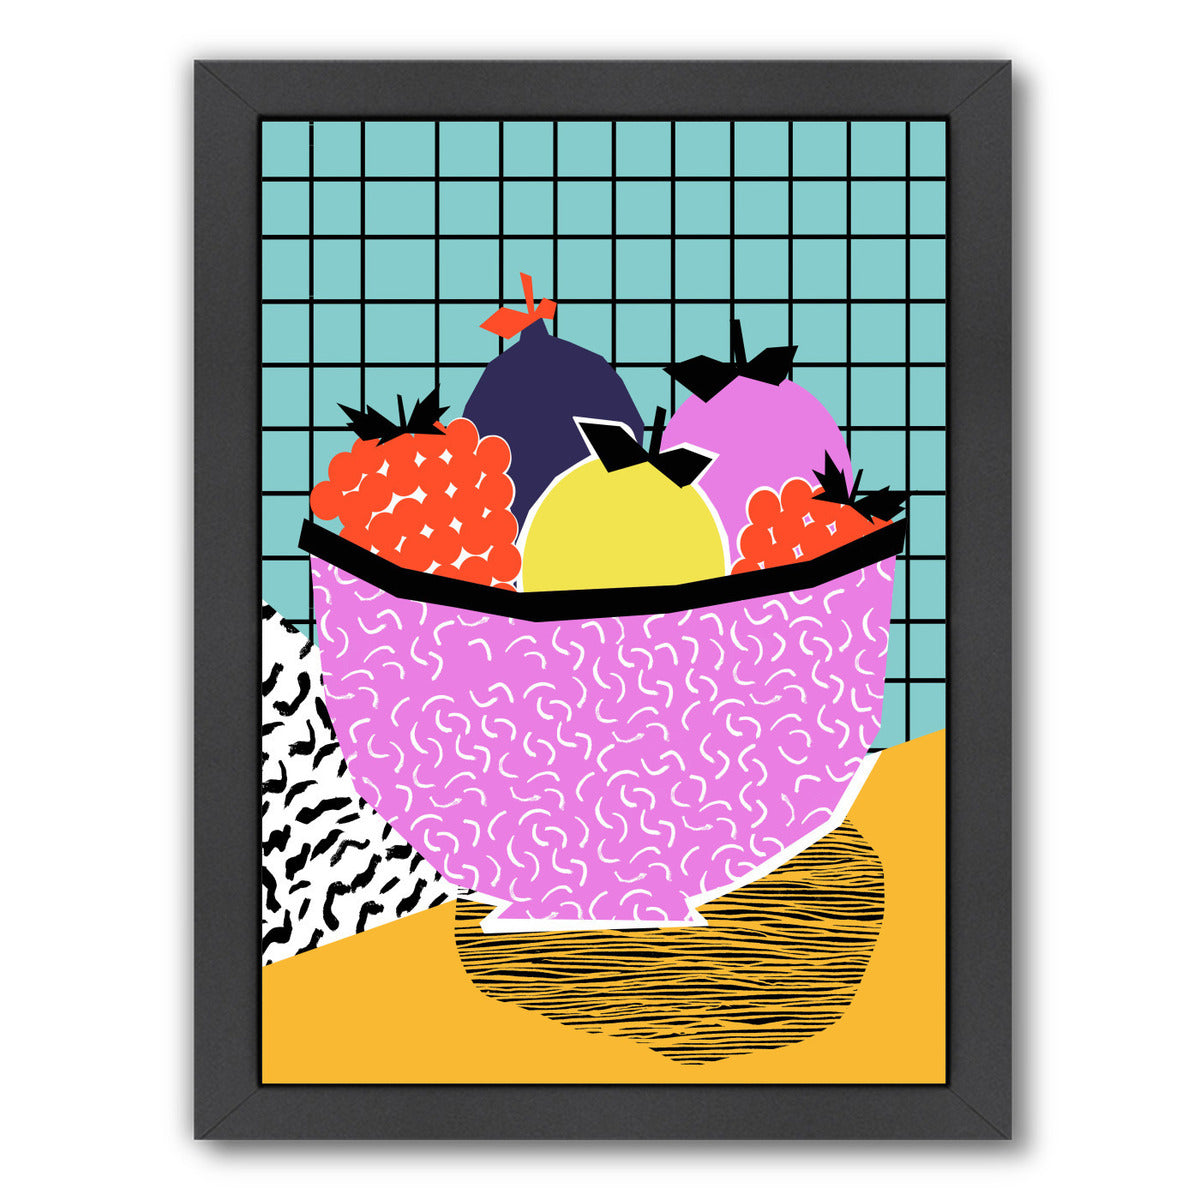 Crucial by Wacka Designs Framed Print - Americanflat